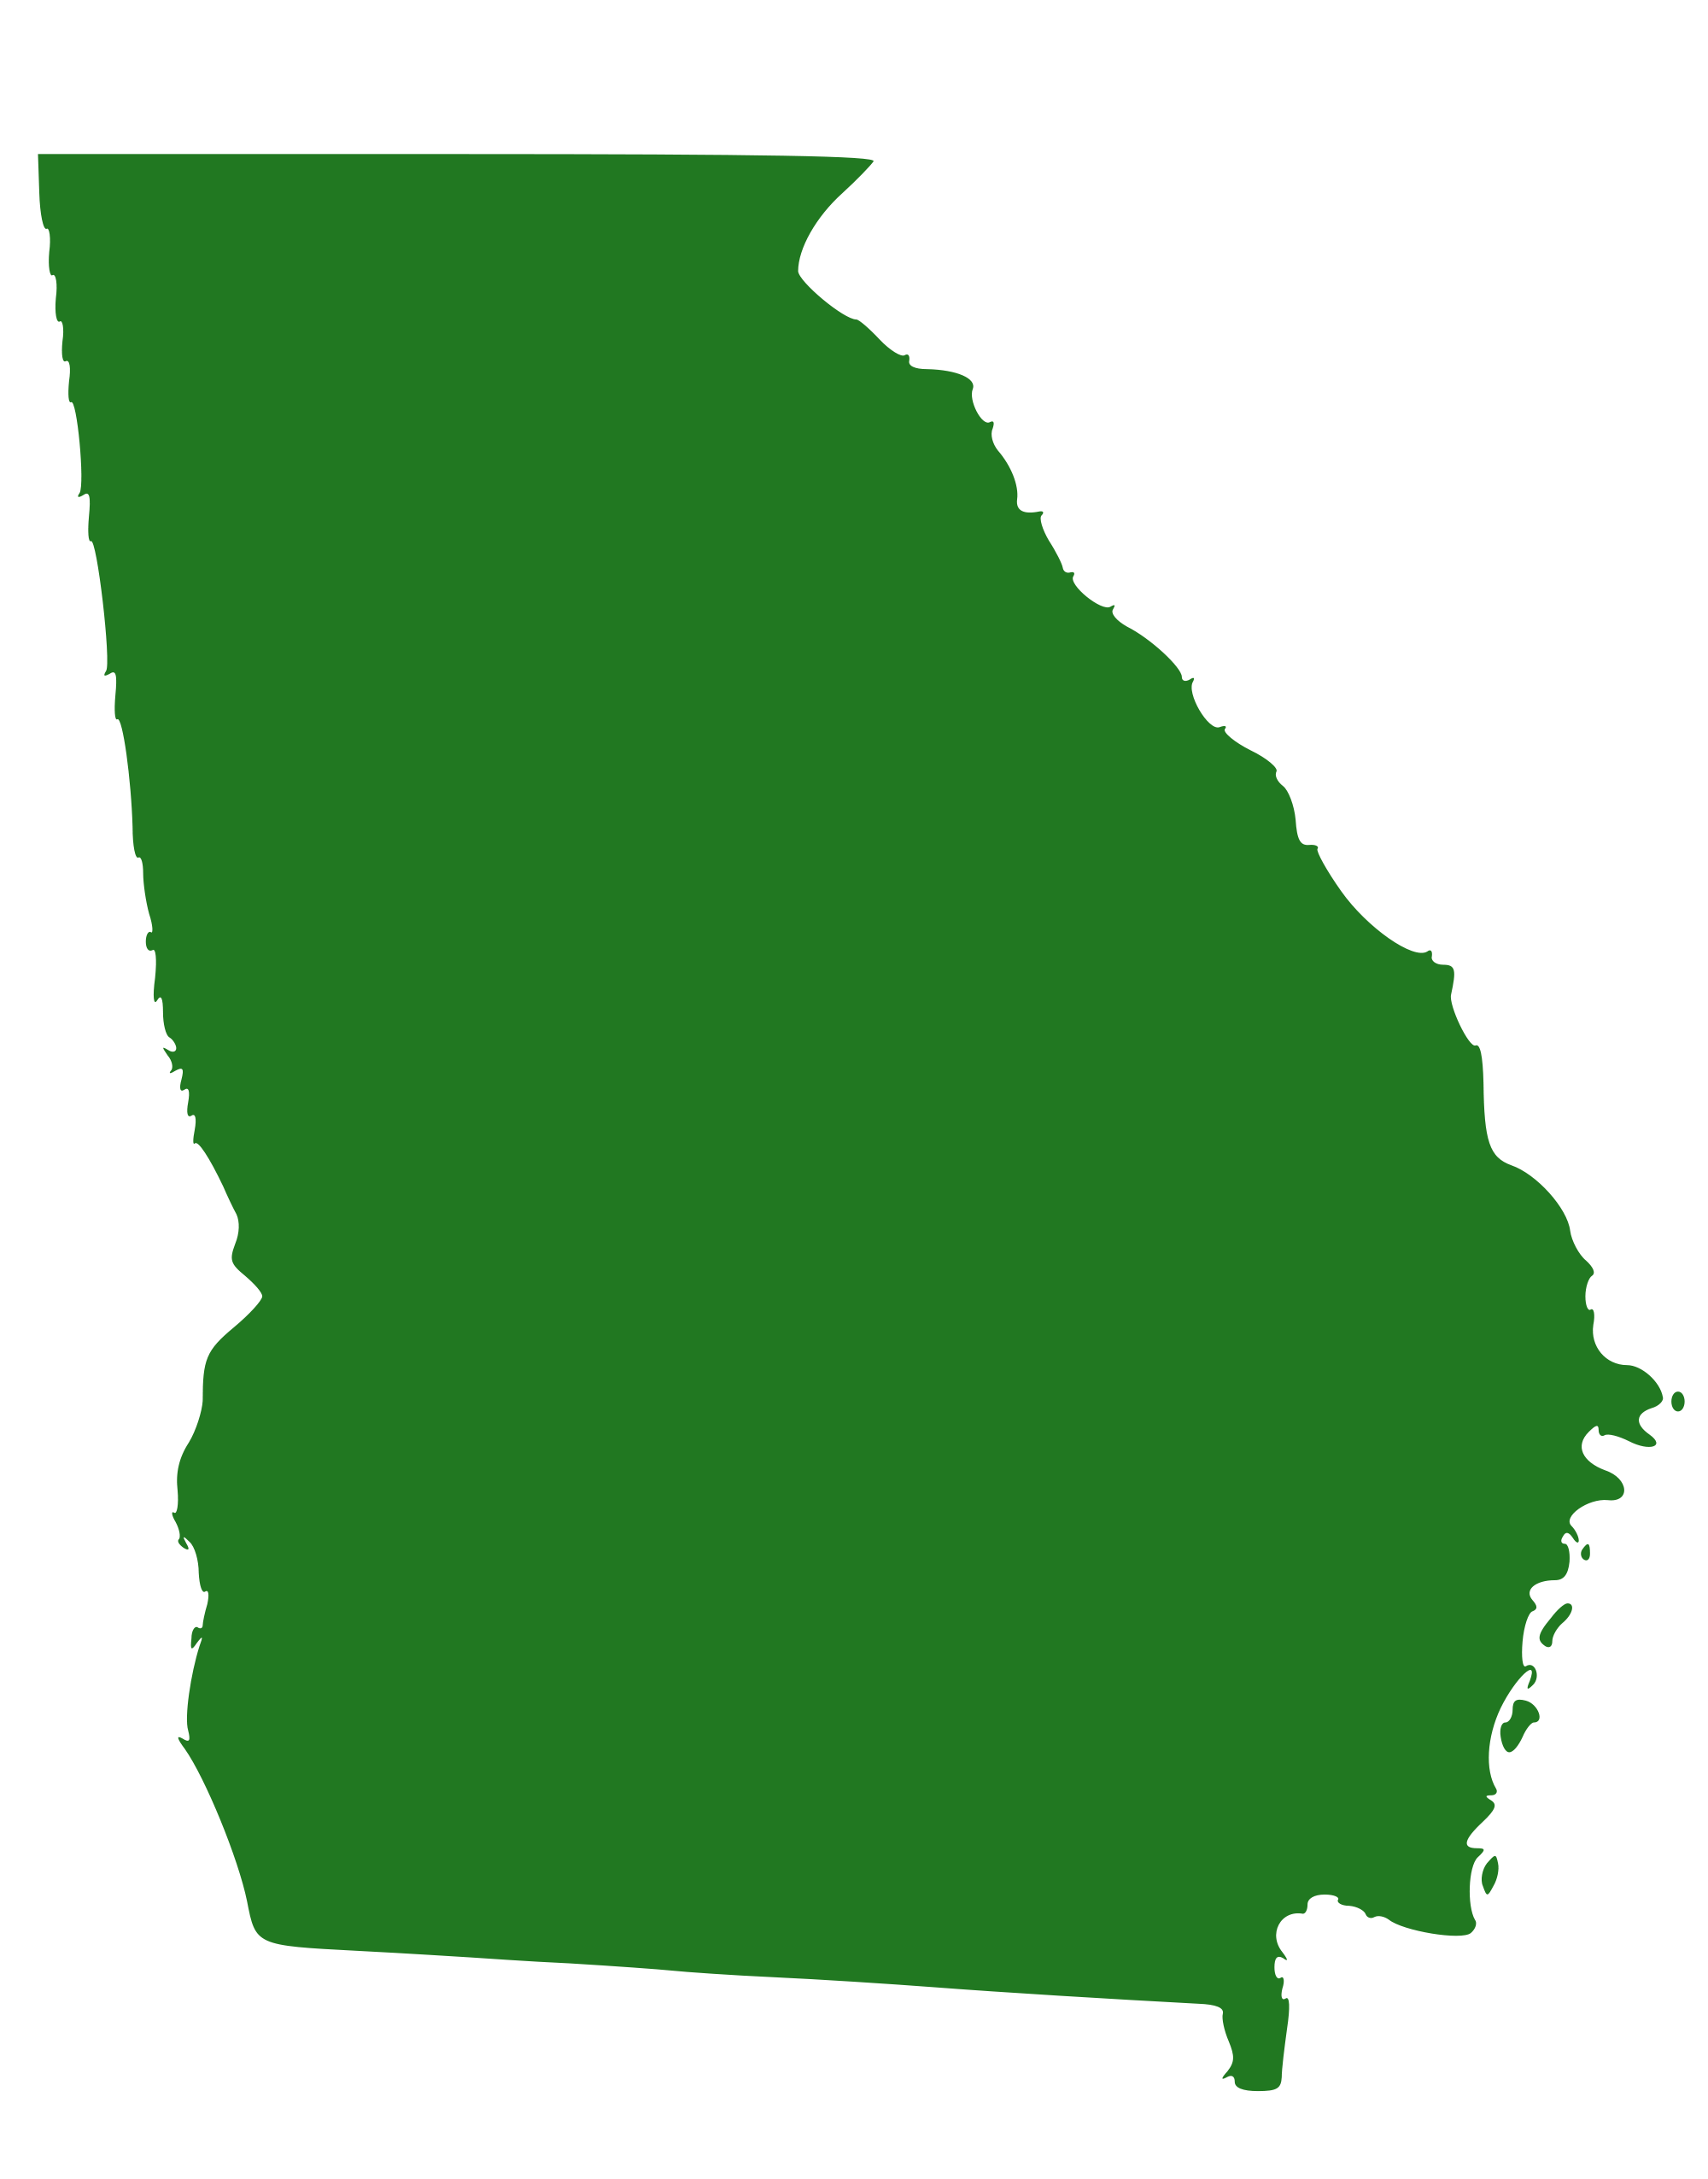 File:State of Georgia.svg - Wikimedia Commons